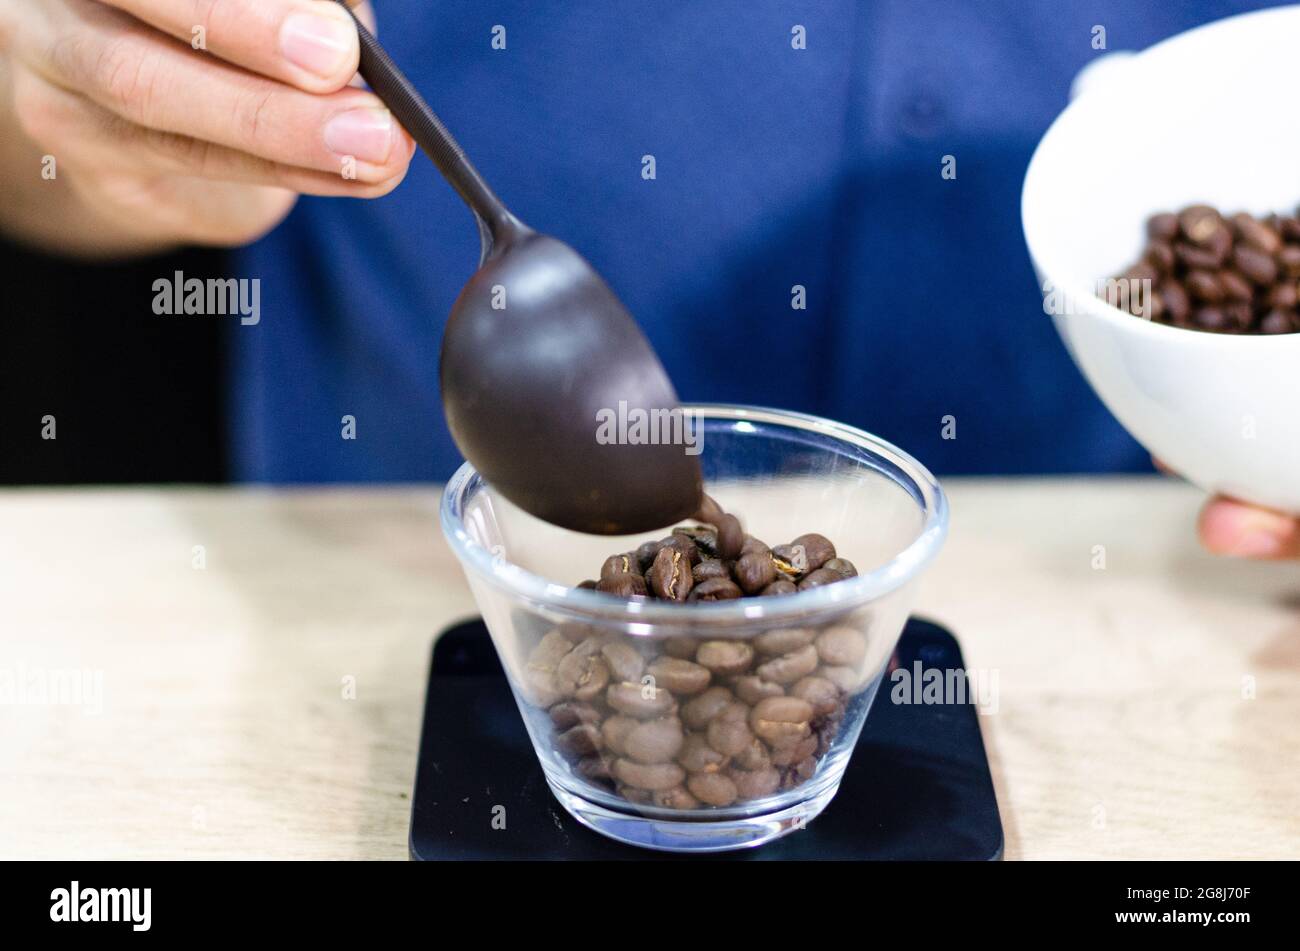 Weighing coffee grains on digital scale. Hands of male barista pouring roasted coffee grains on a scale before brewing coffee. Stock Photo